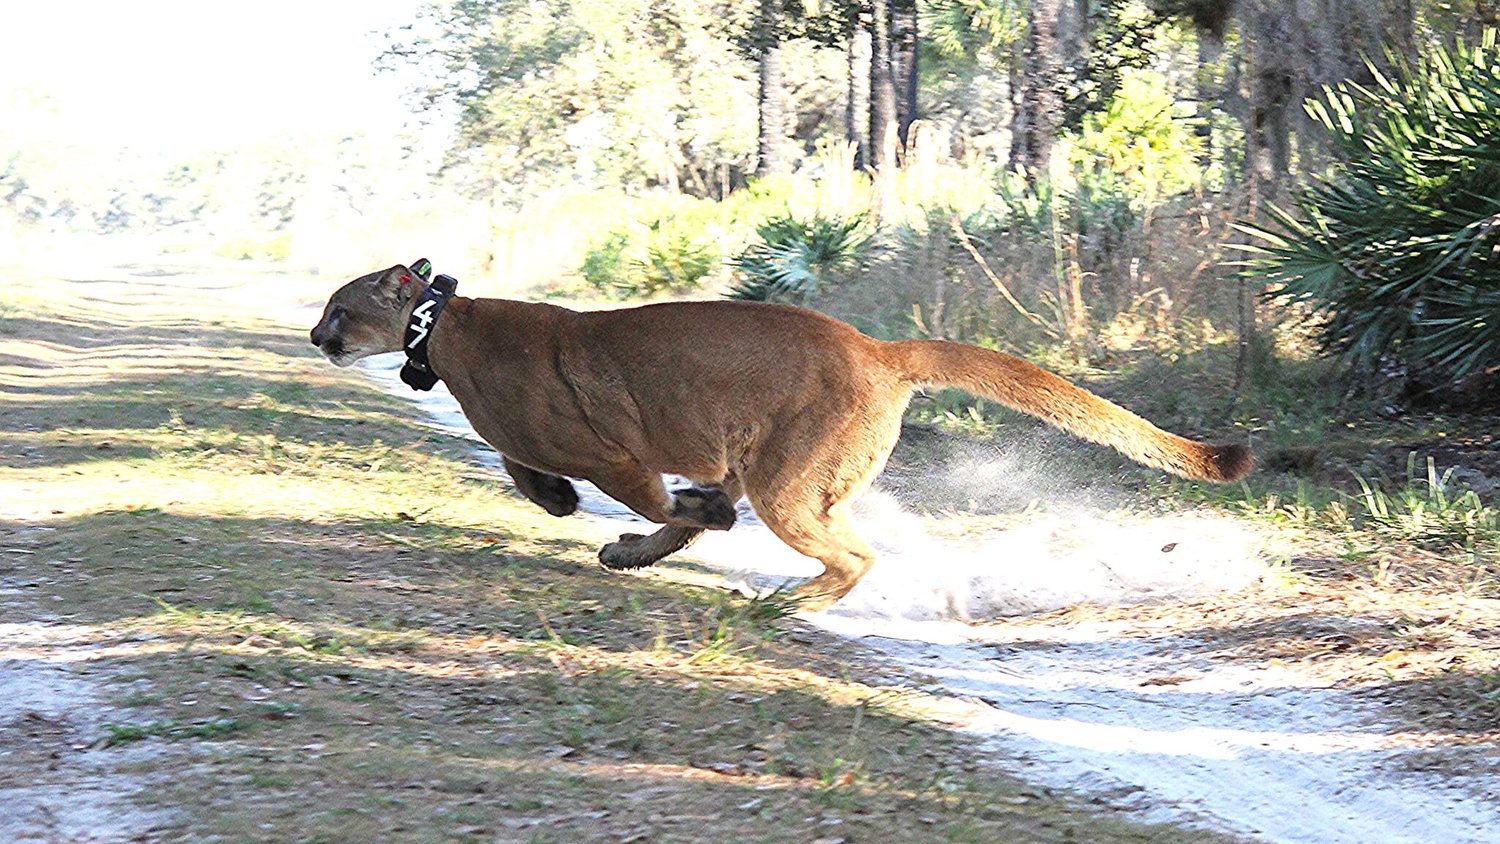 A Florida panther that had been hit by a car is released back into the wild with a collar attached to track it.